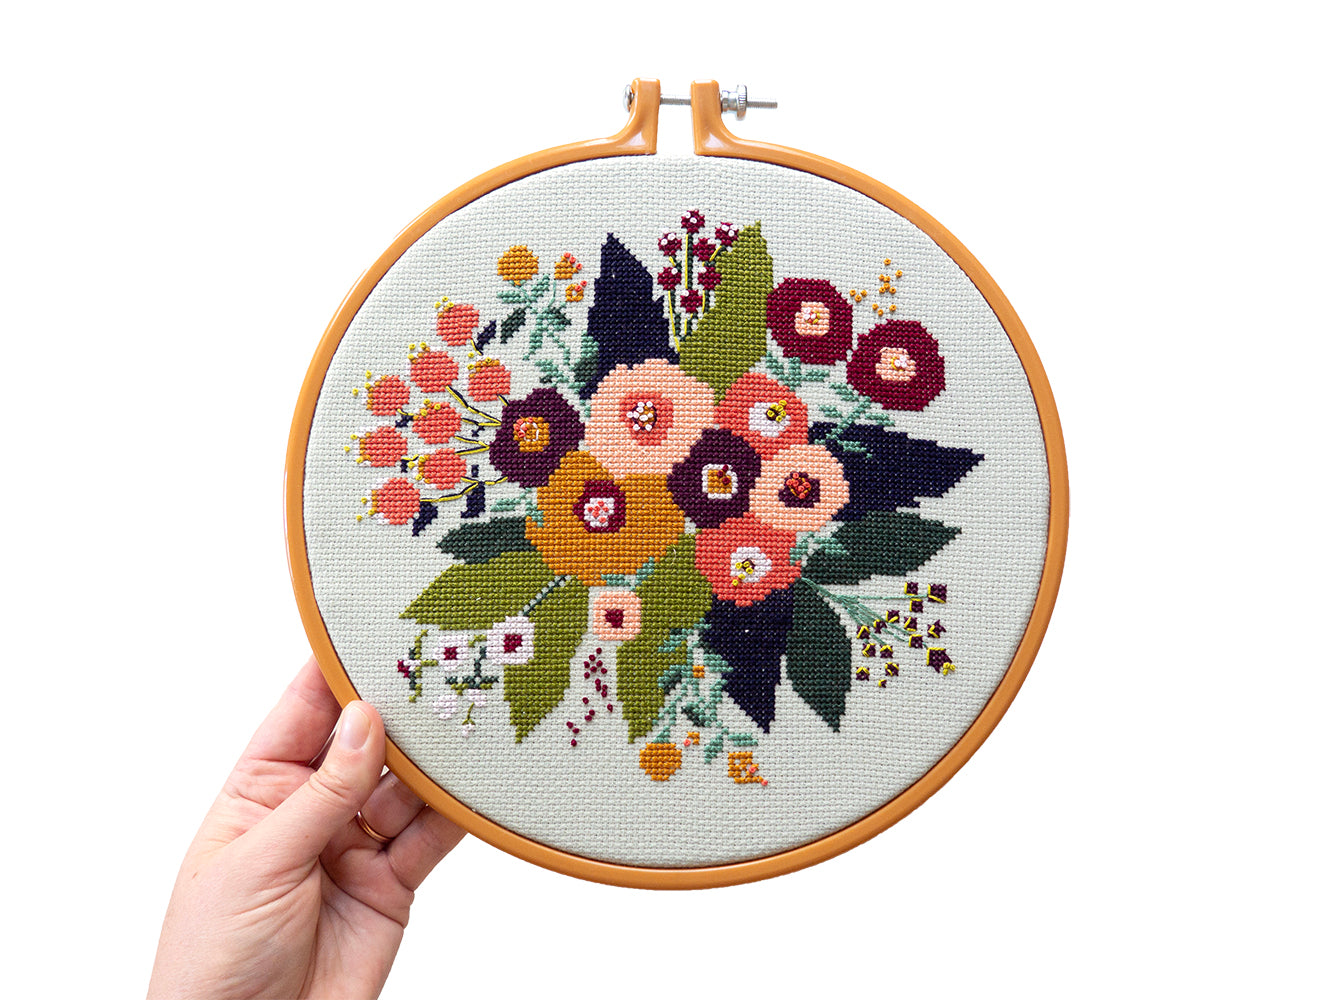 Midnight Floral Embroidery Kit --- Junebug and Darlin – Three Little Birds  Sewing Co.